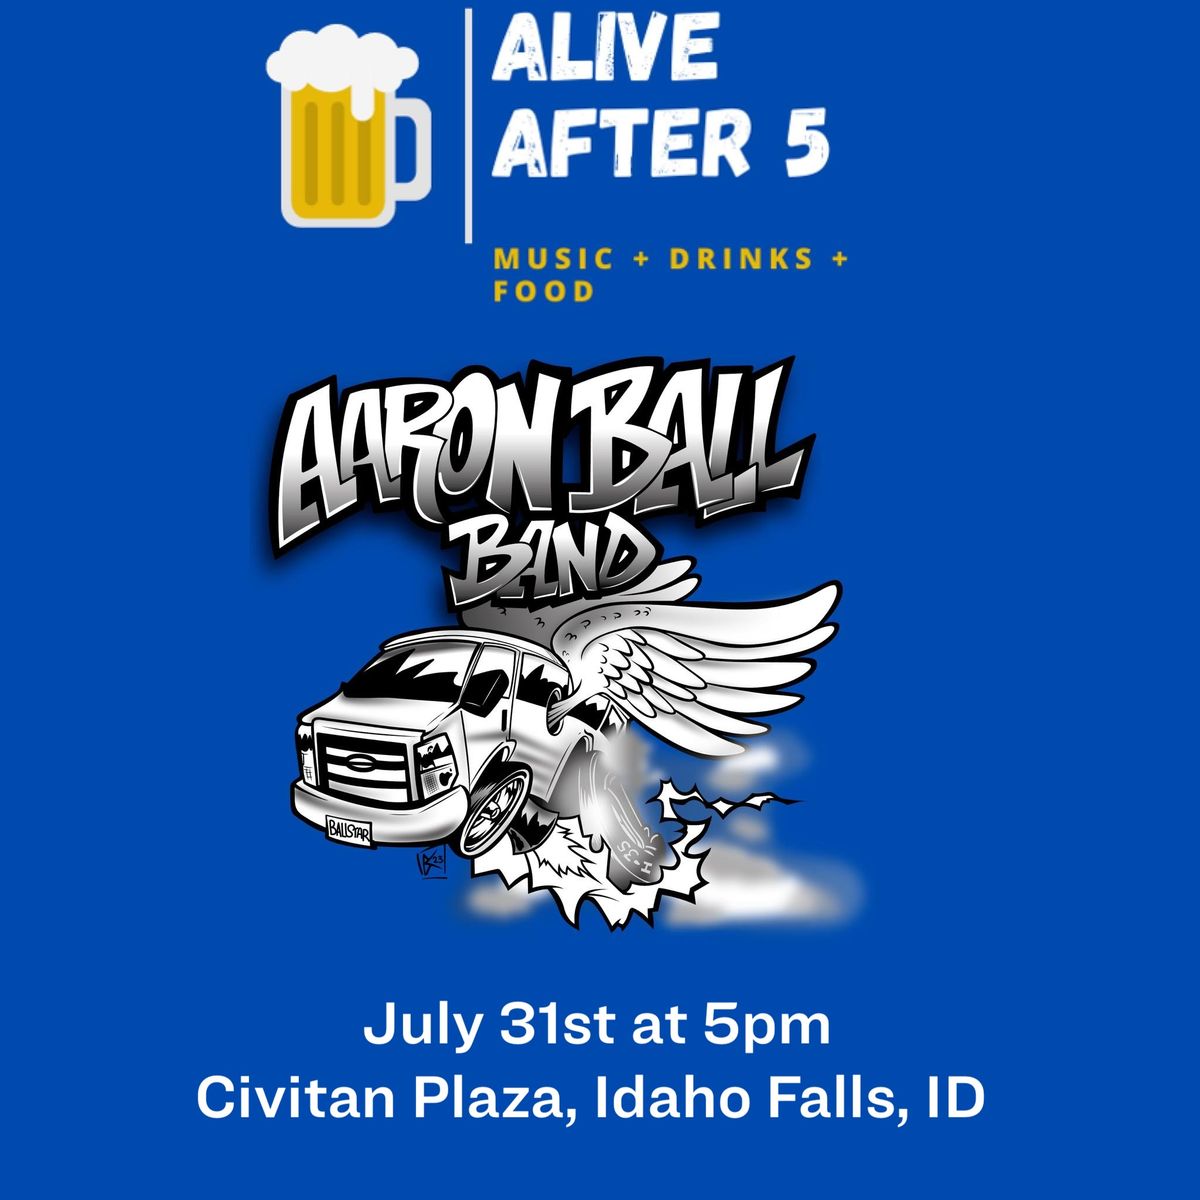 Alive After 5 presents Aaron Ball Band